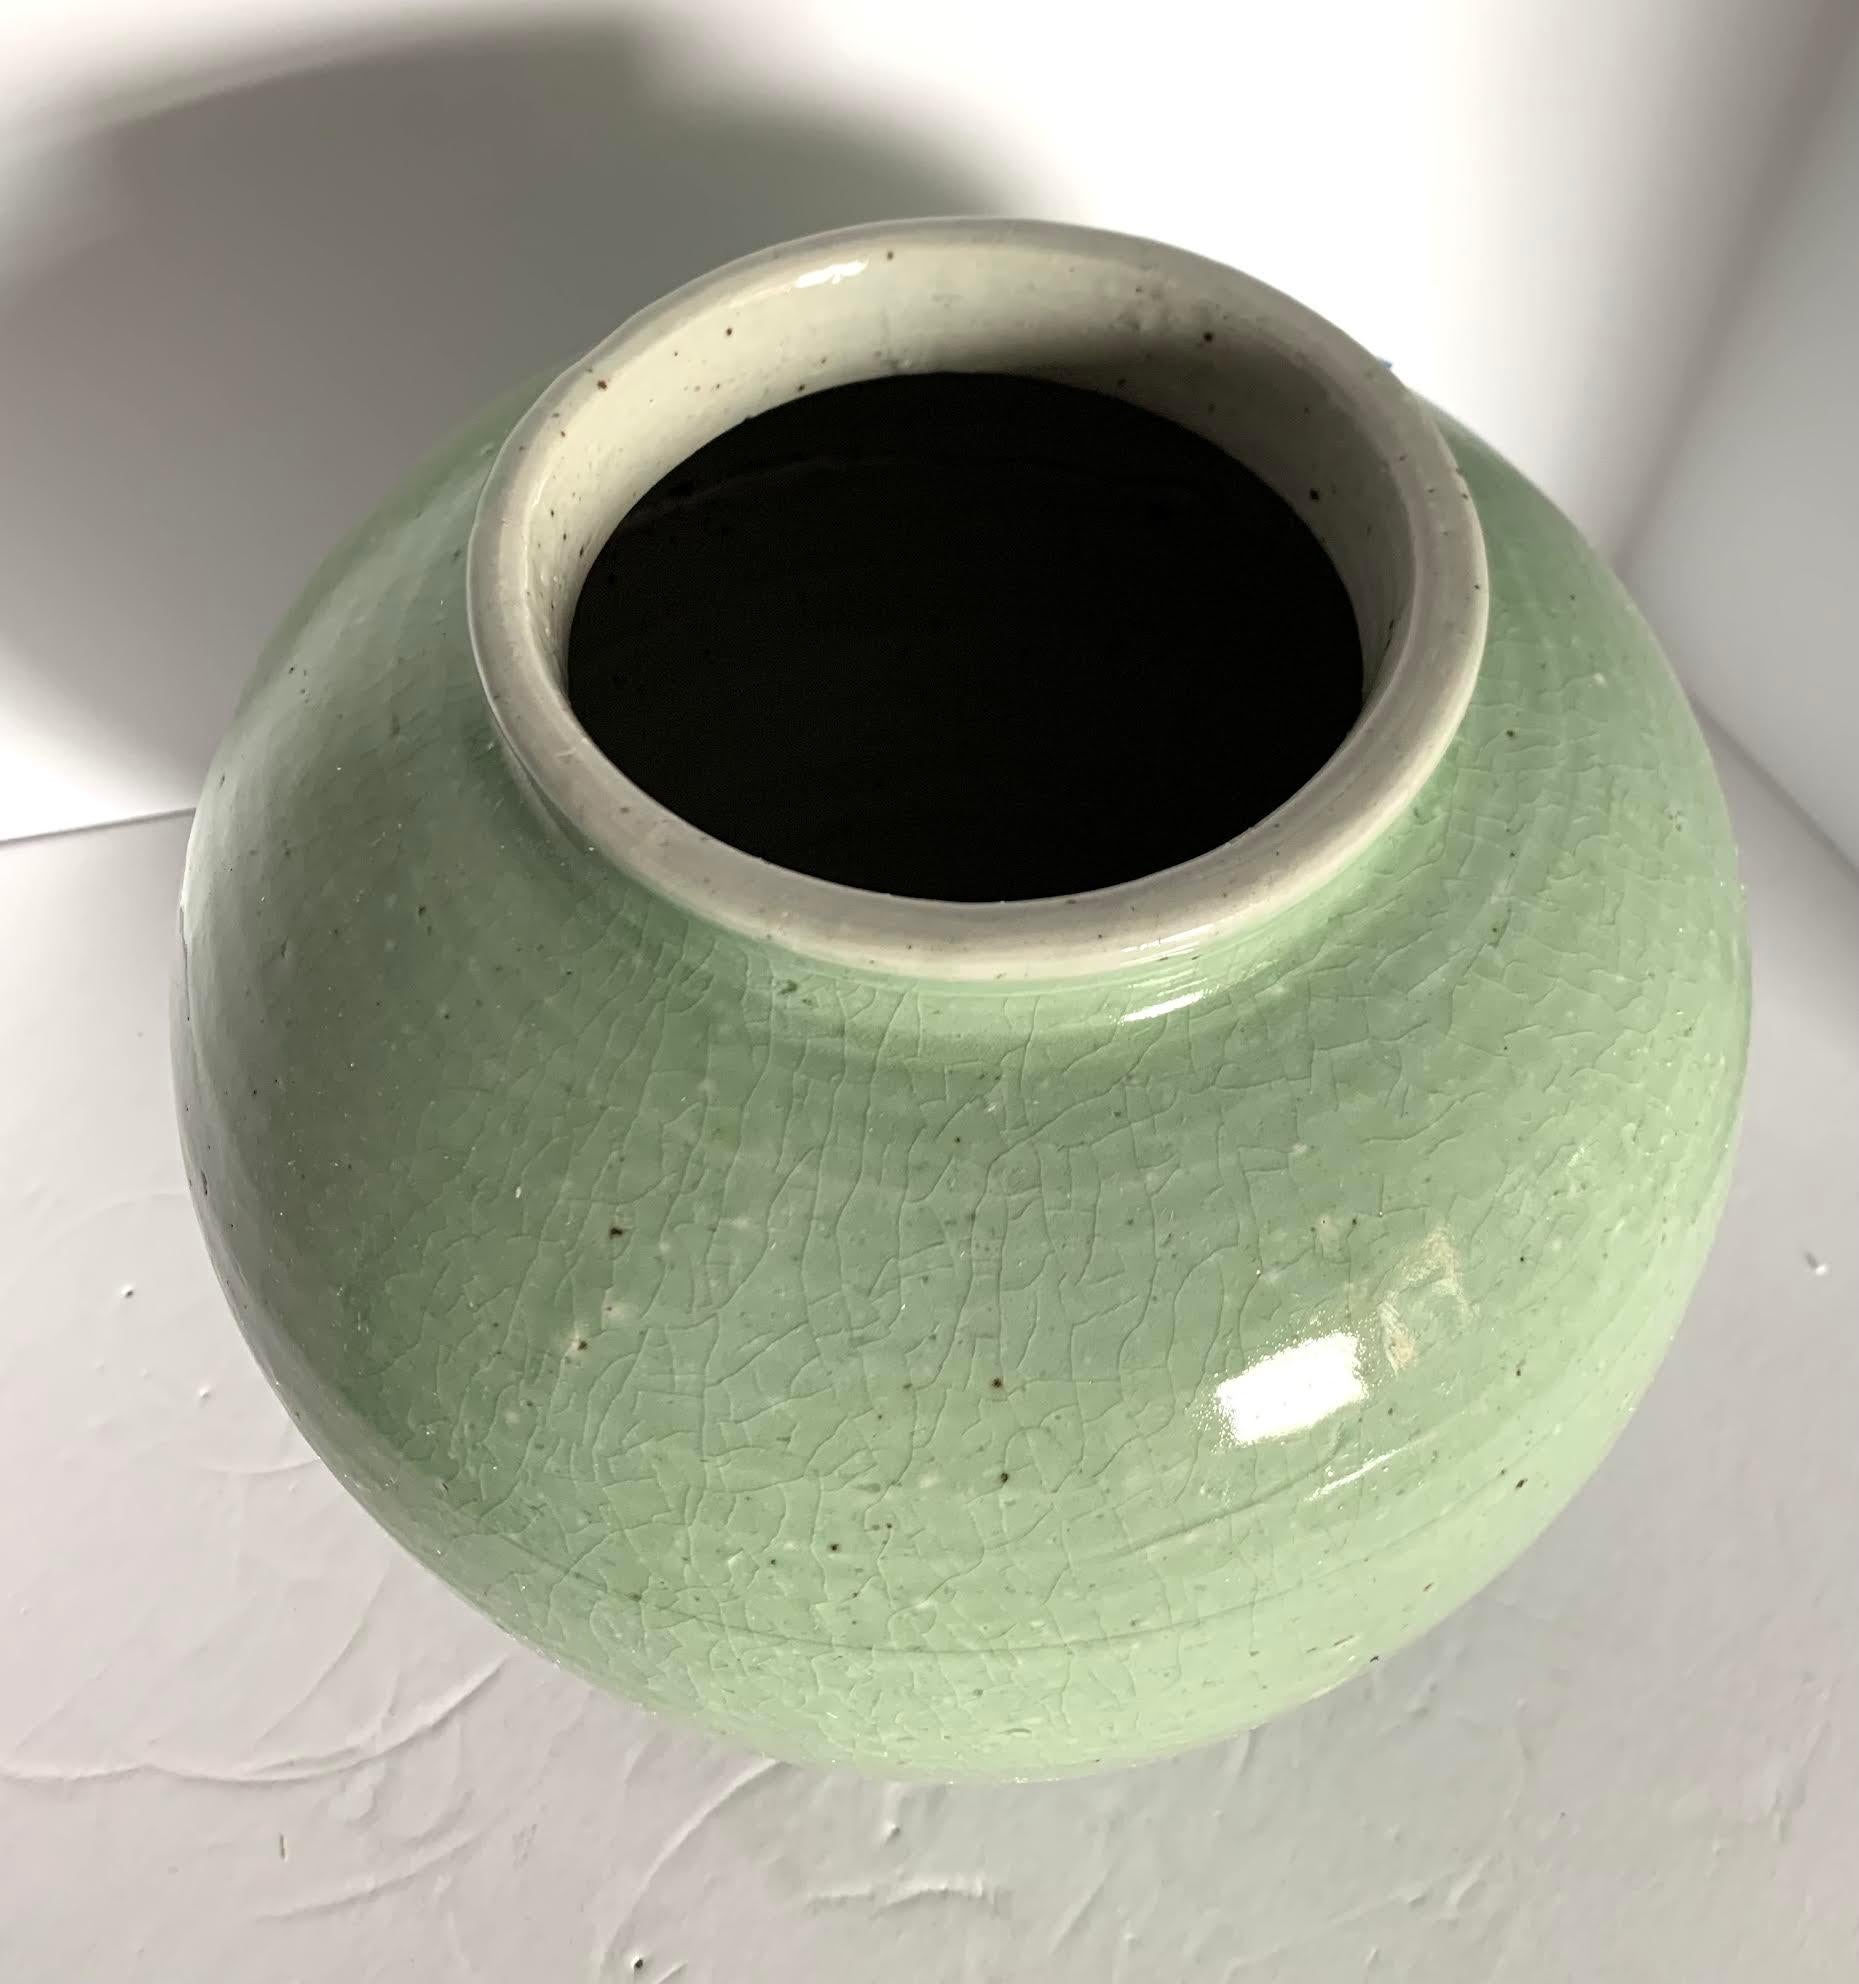 Contemporary Chinese celadon color ceramic vase.
Classic ginger jar shape
Several available.